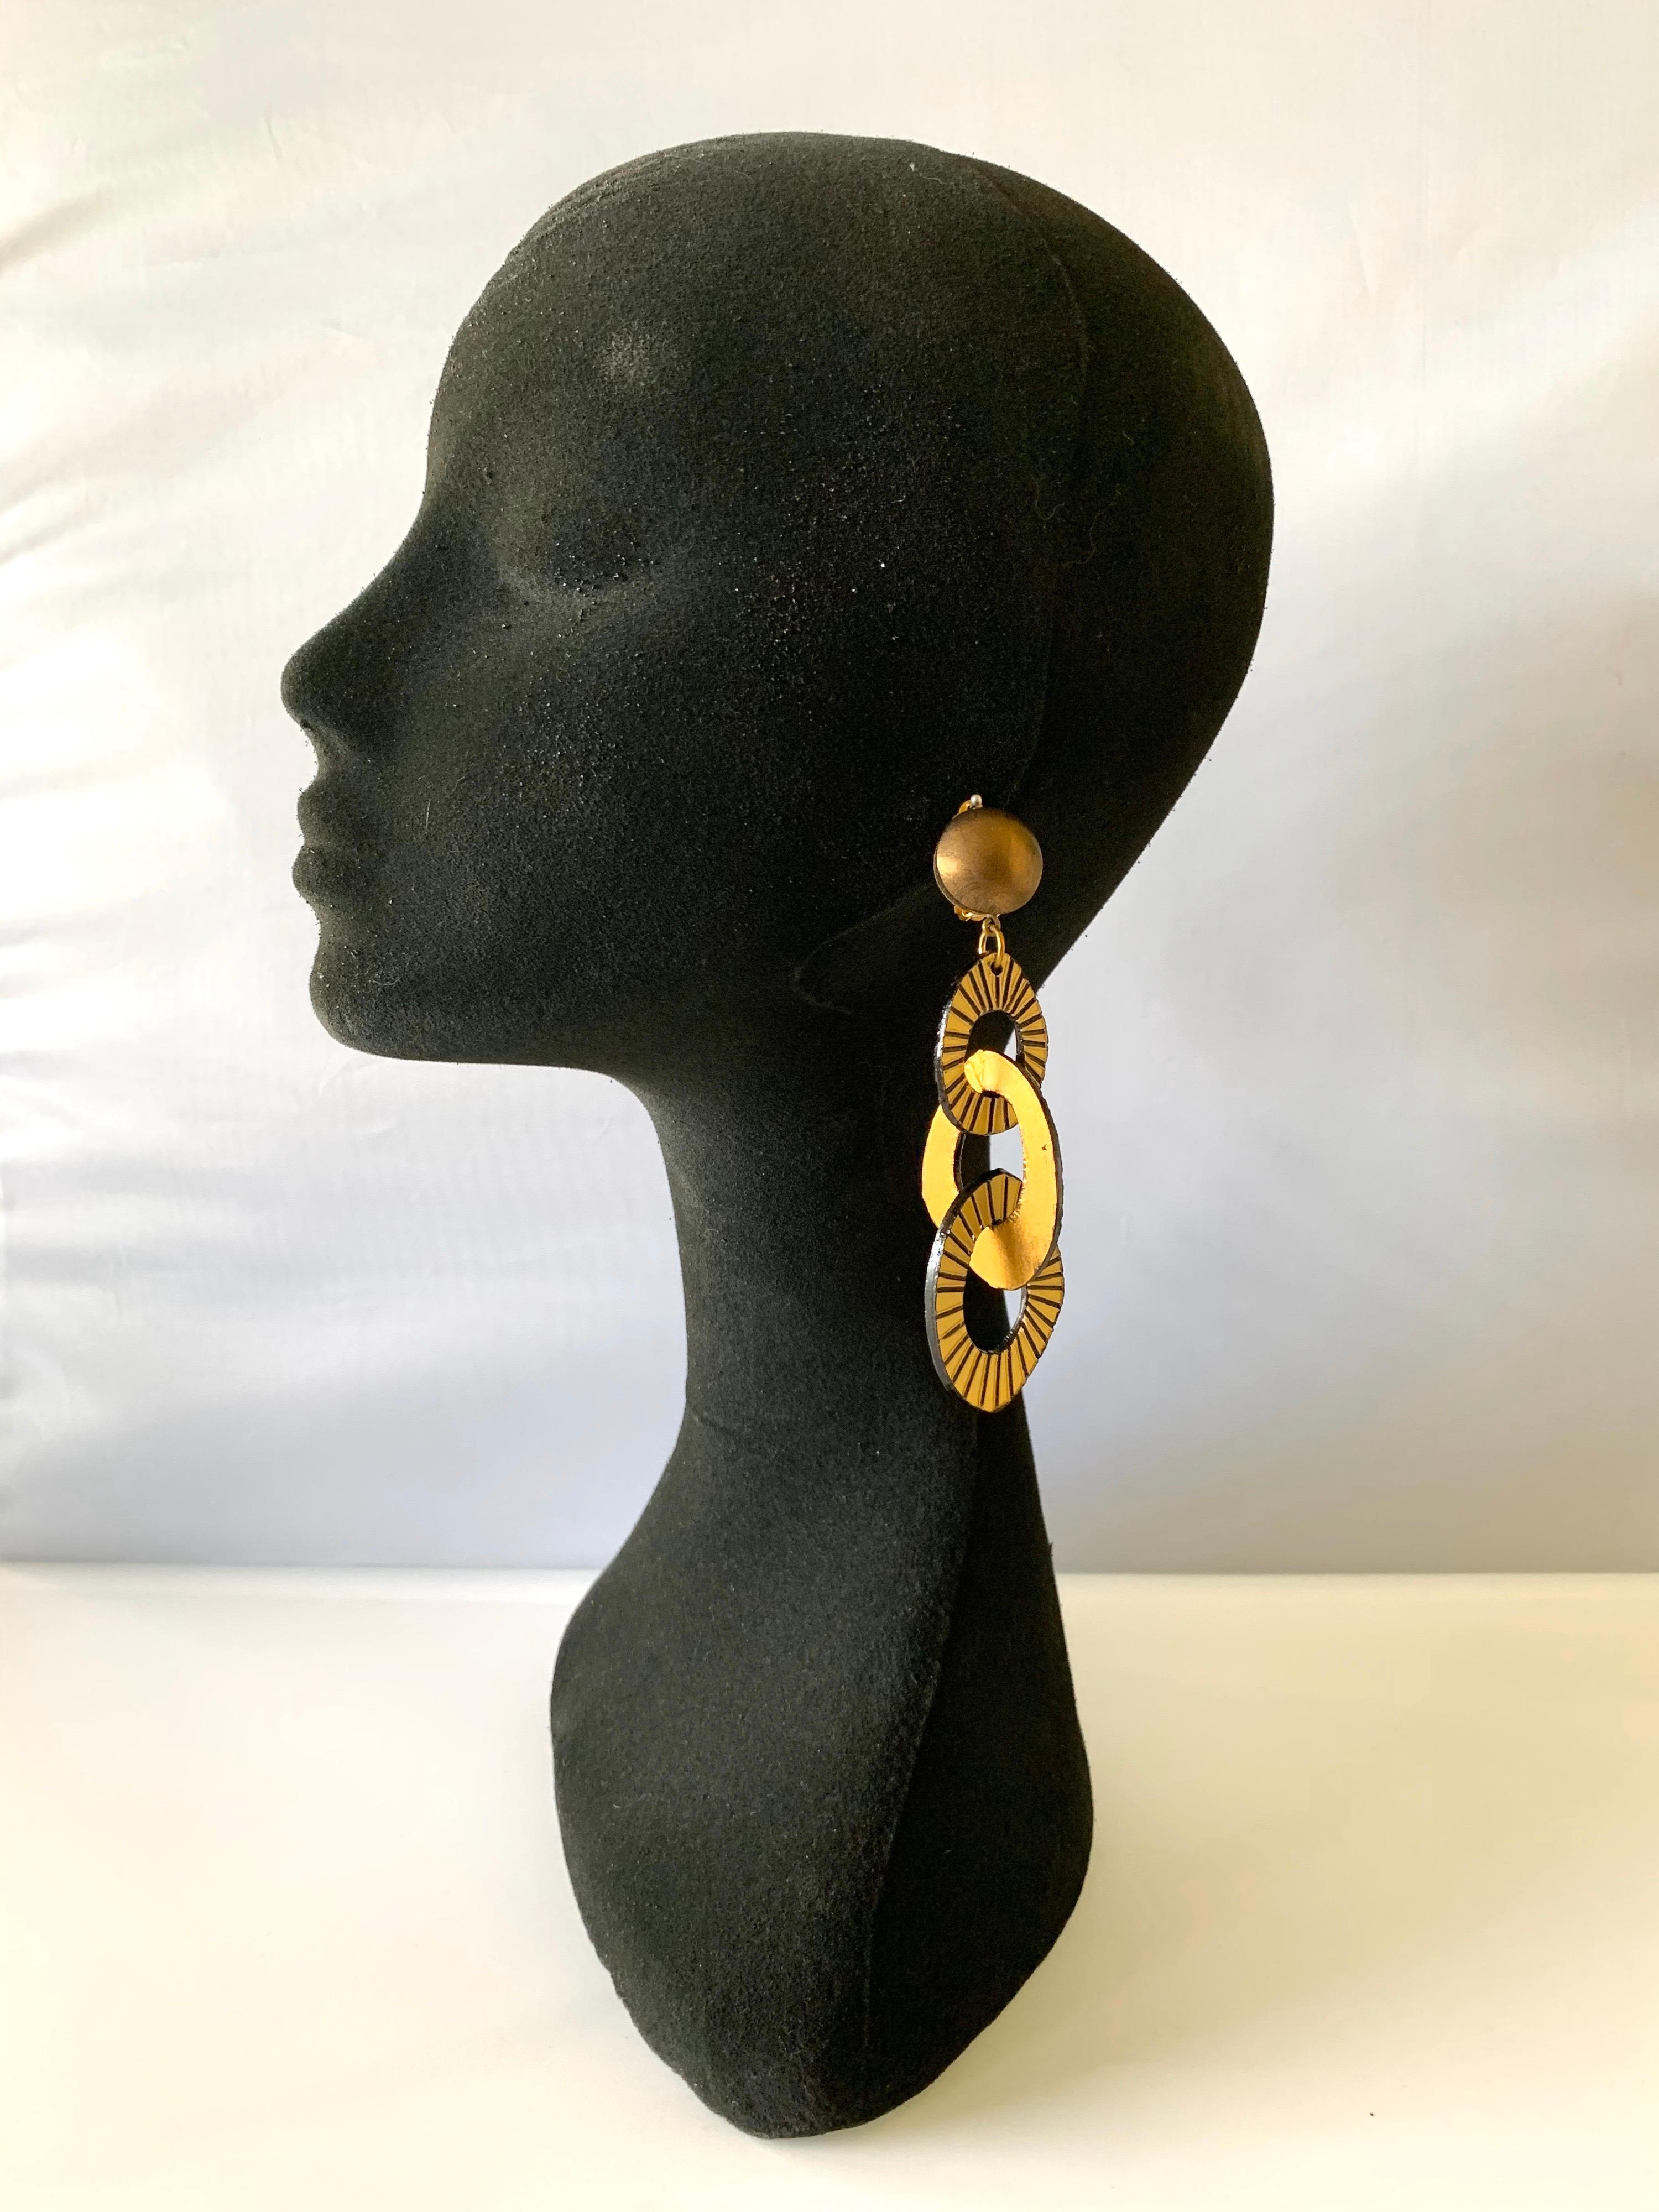 Chic and very current, these handmade fashion-forward artisanal clip-on earrings were made in Paris. The statement earrings feature three carved detailed architectural (enamel and resin composite) geometric links in bronze and gold. Lightweight and